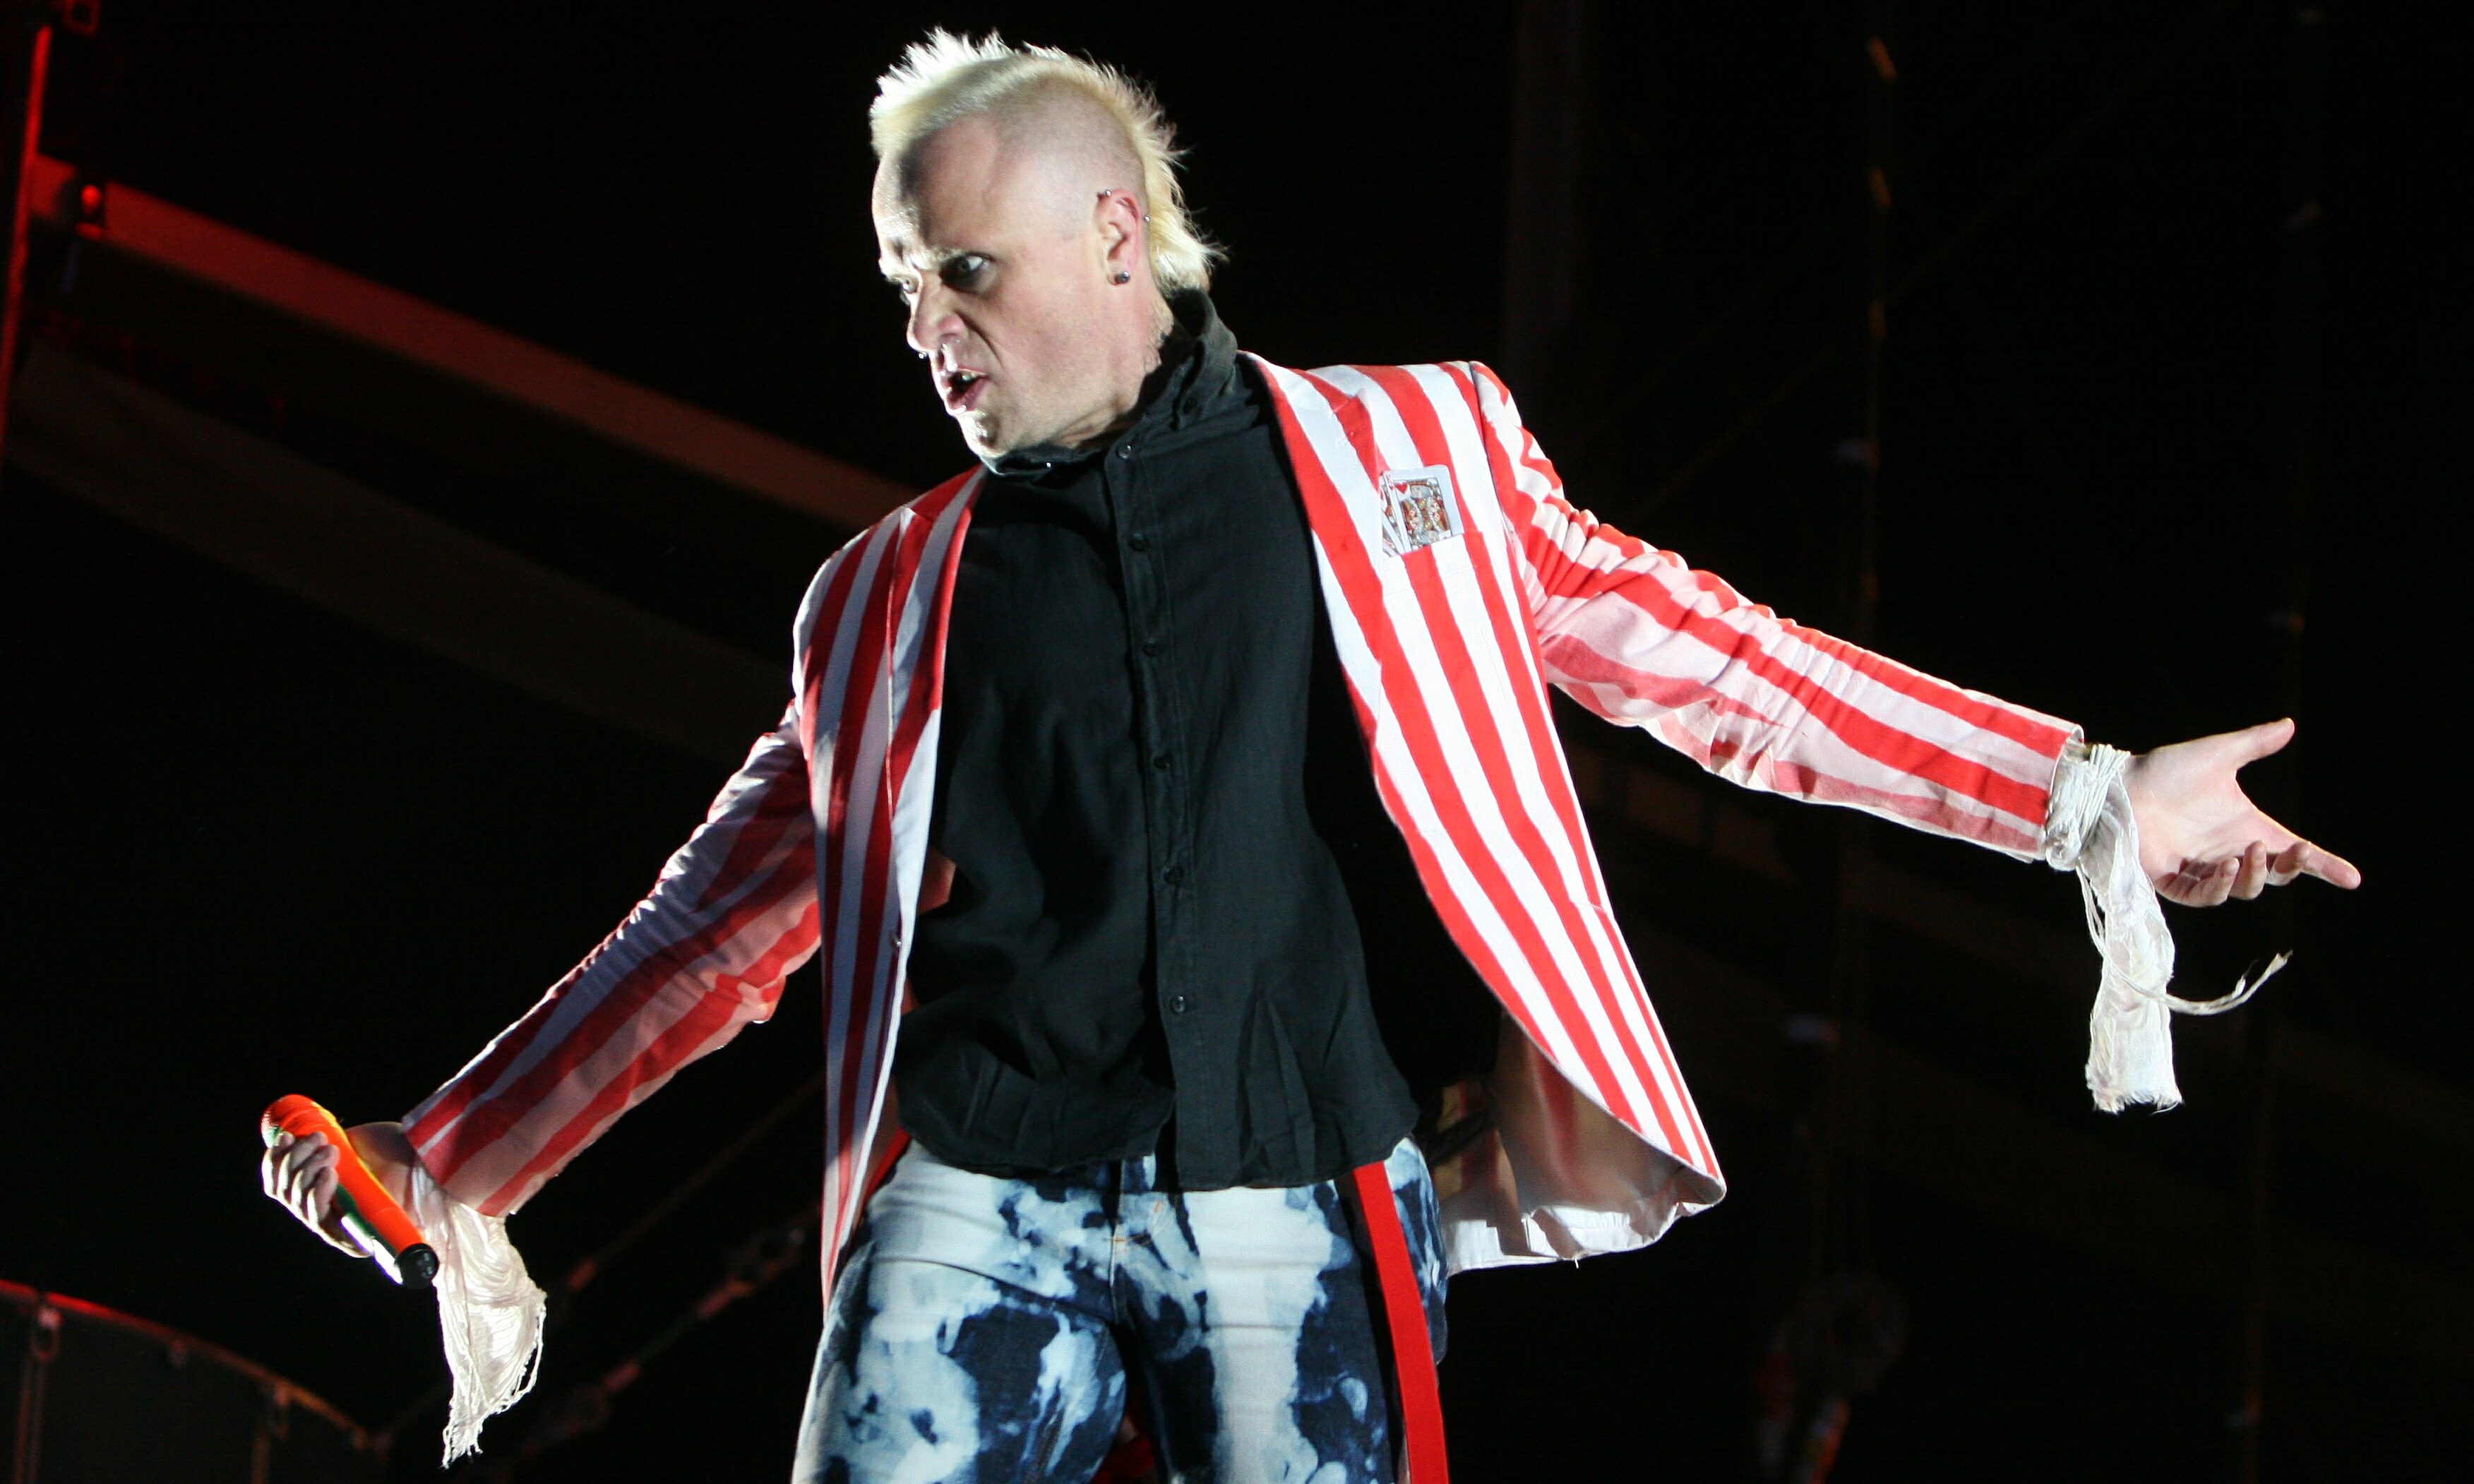 Keith Flint of The Prodigy at T in the Park in 2008.